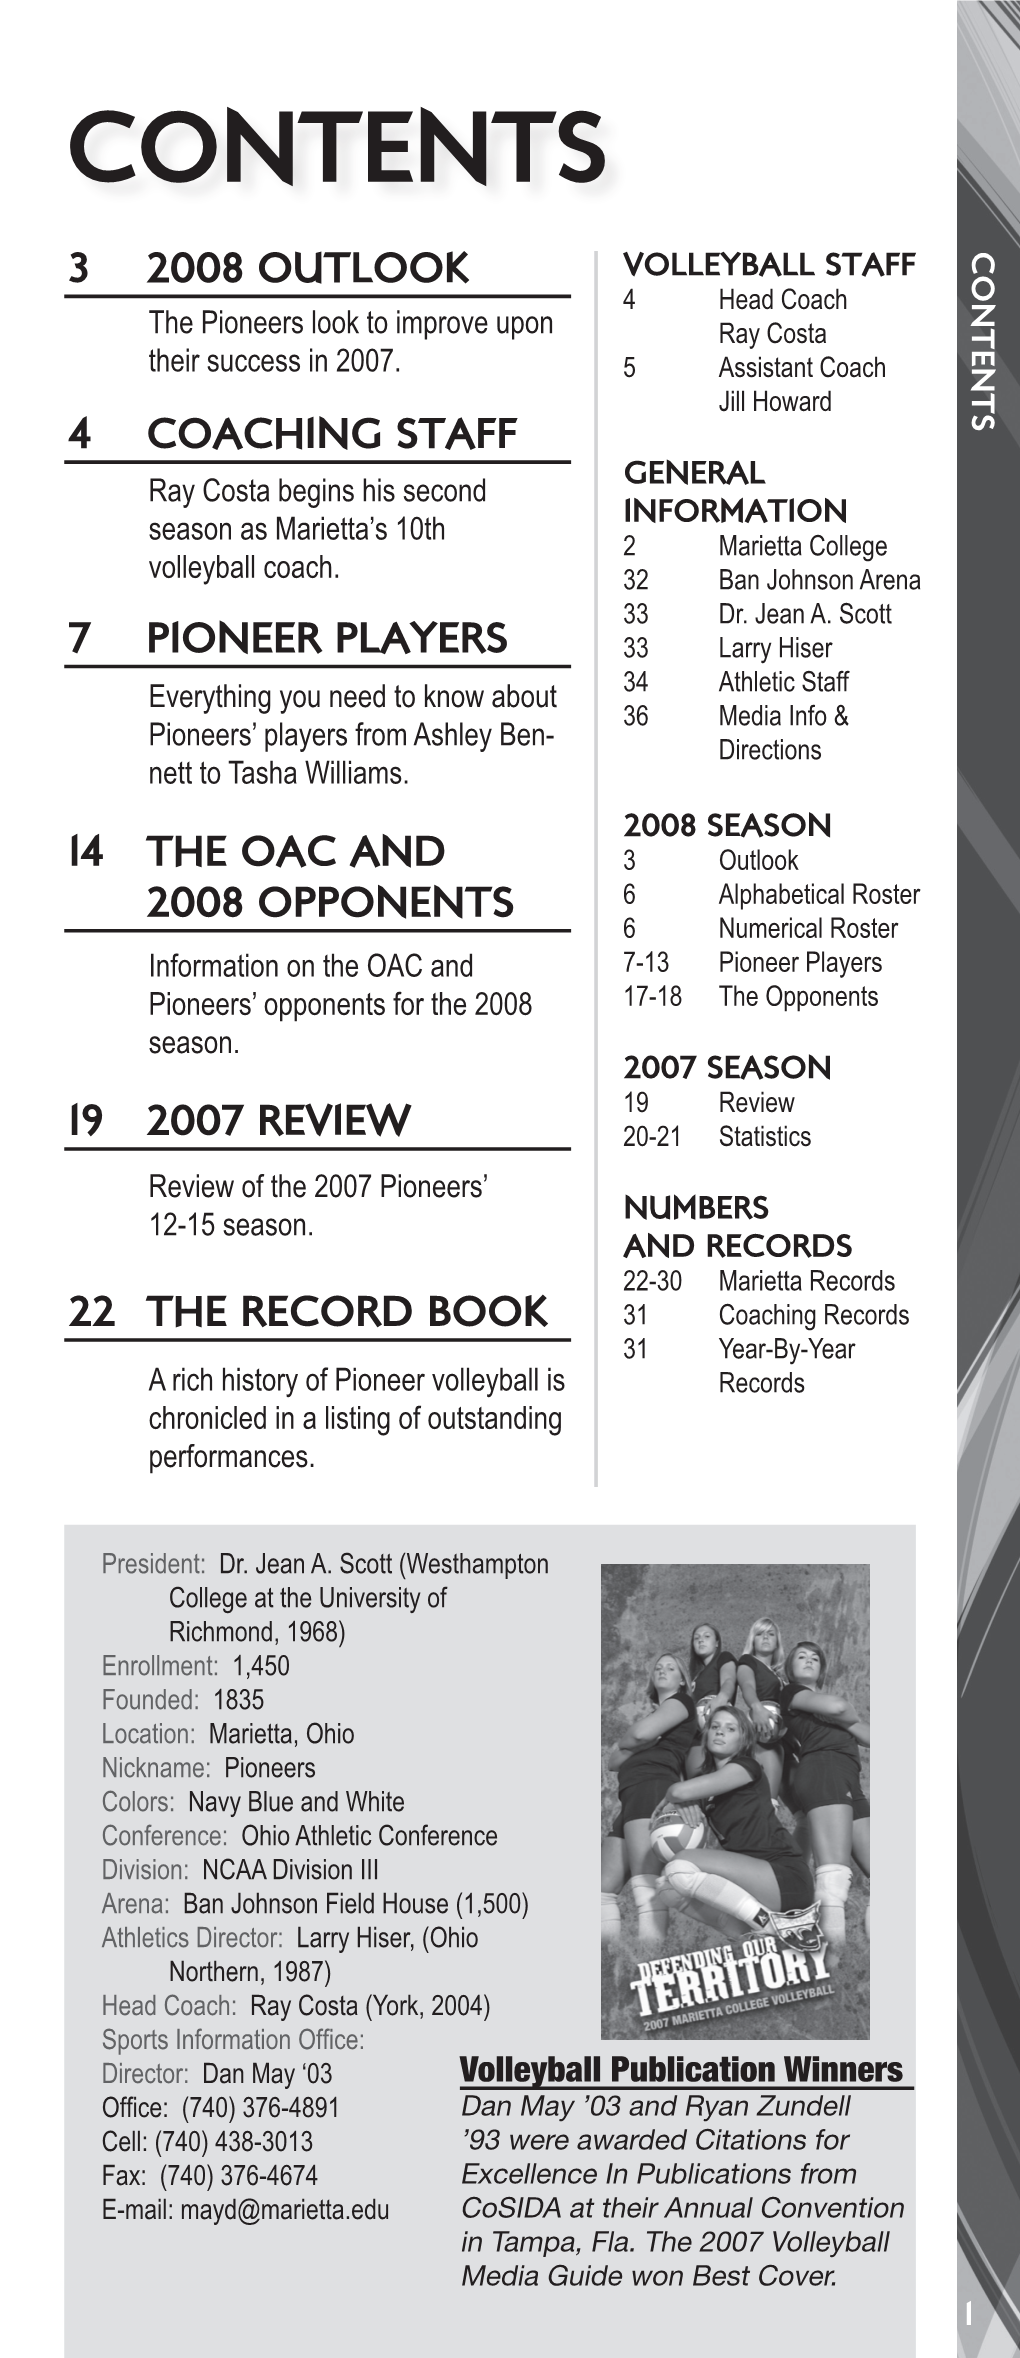 Contents Contents 3 2008 Outlook Volleyball Staff 4 Head Coach the Pioneers Look to Improve Upon Ray Costa Their Success in 2007